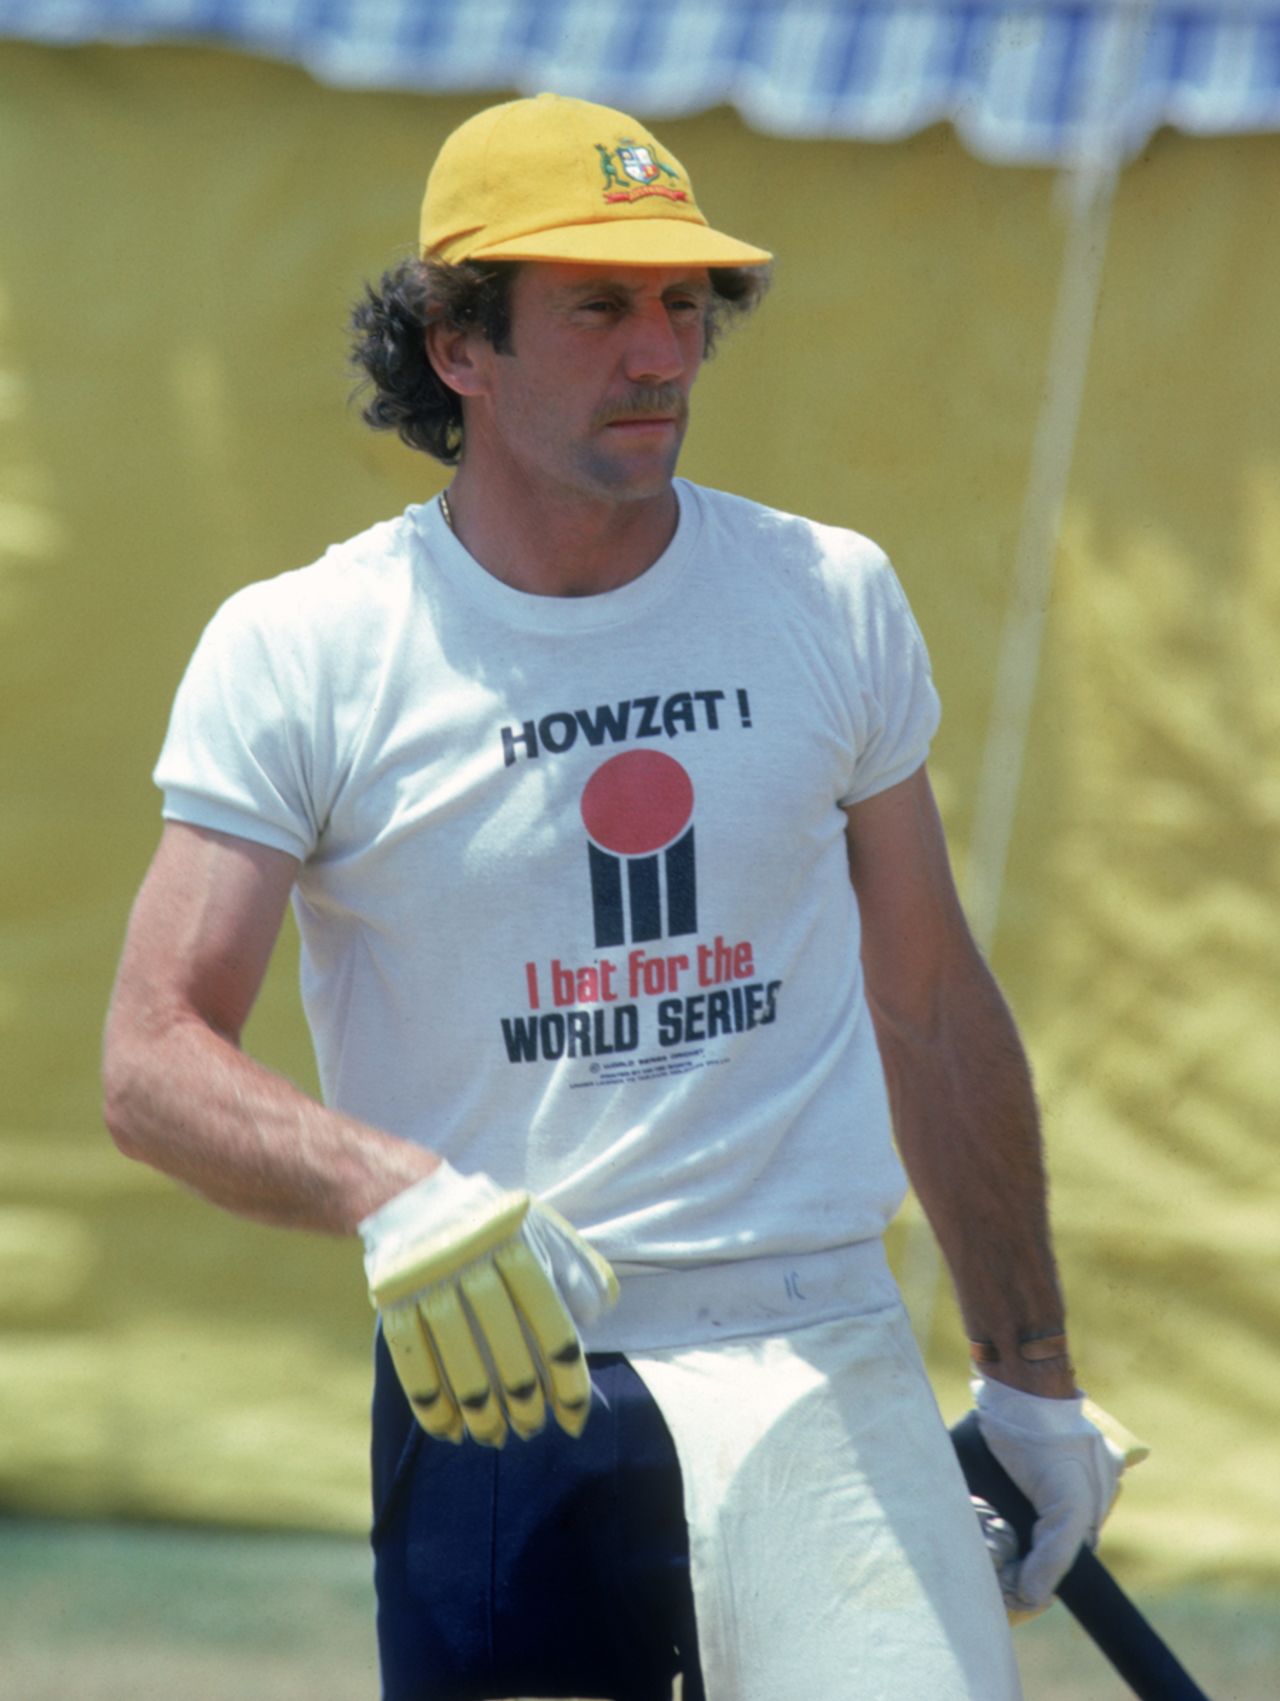 Ian Chappell wearing a World Series t-shirt pads up for a one day international match against the West Indies in Sydney, December 14, 1979